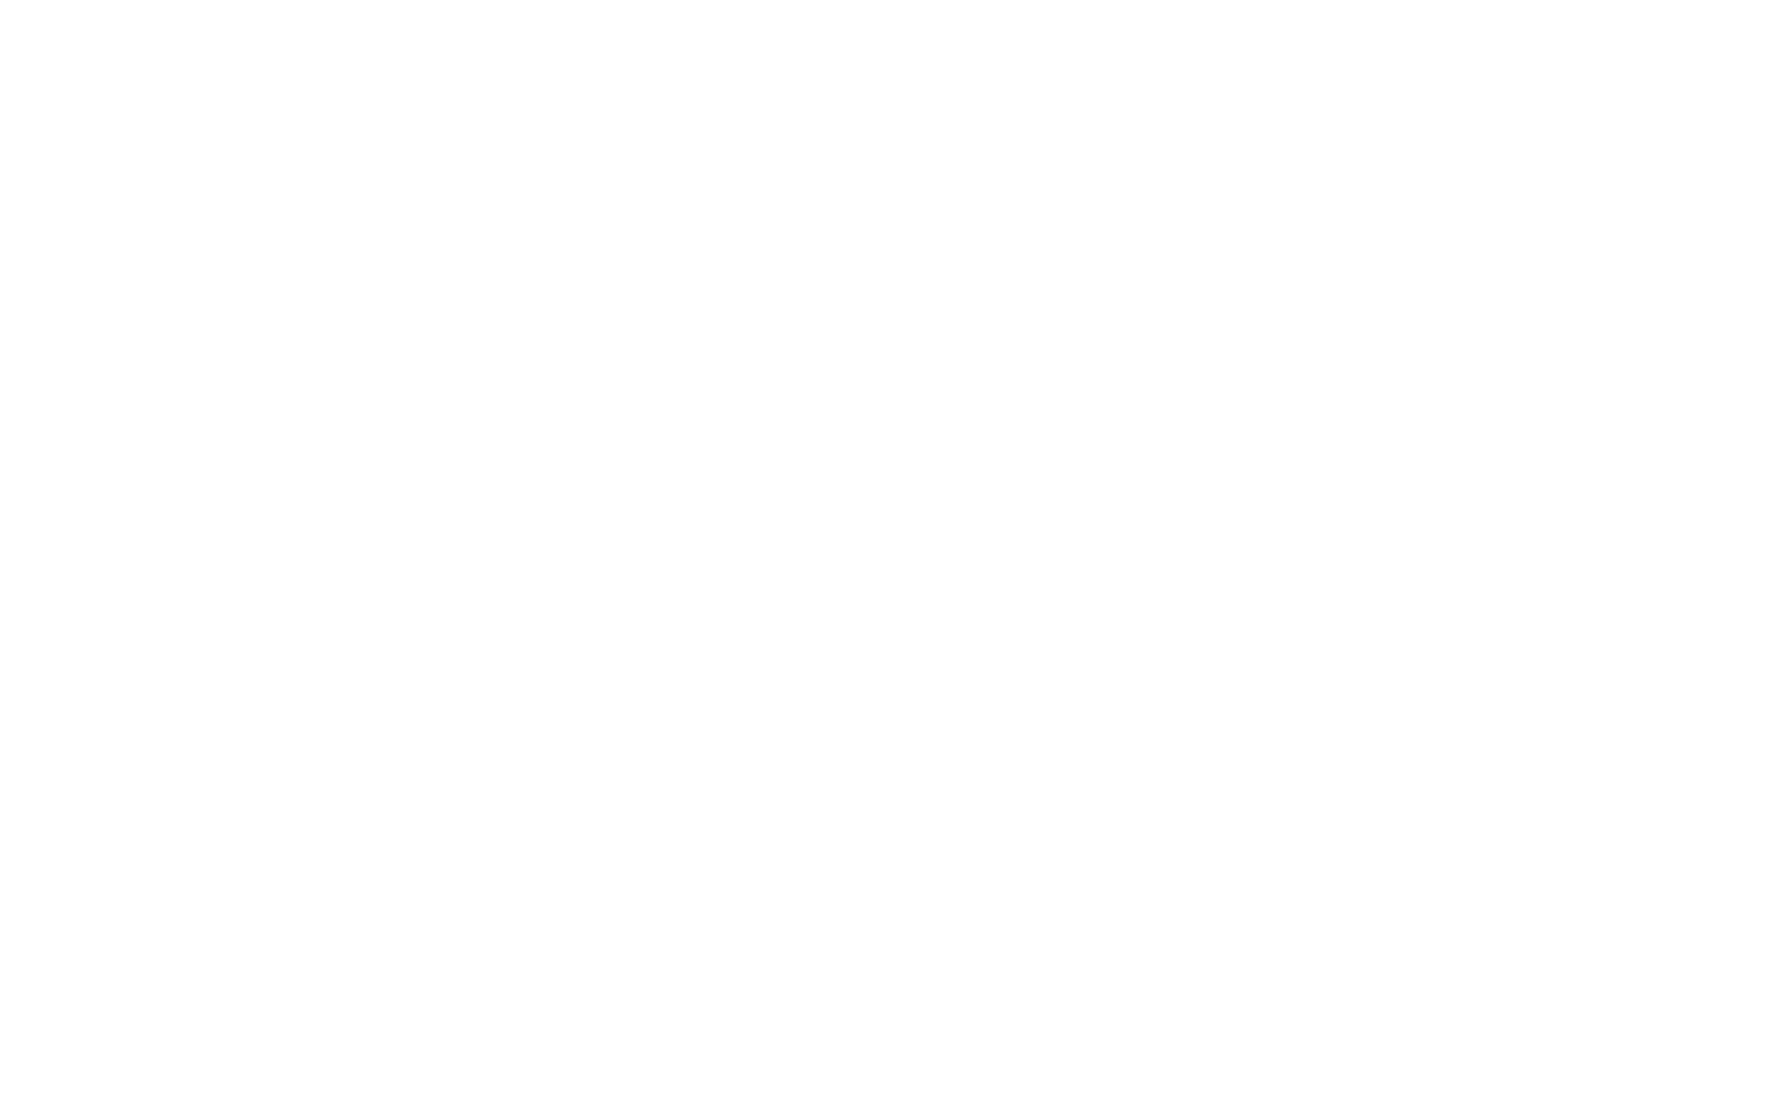 Sculpting the Giant